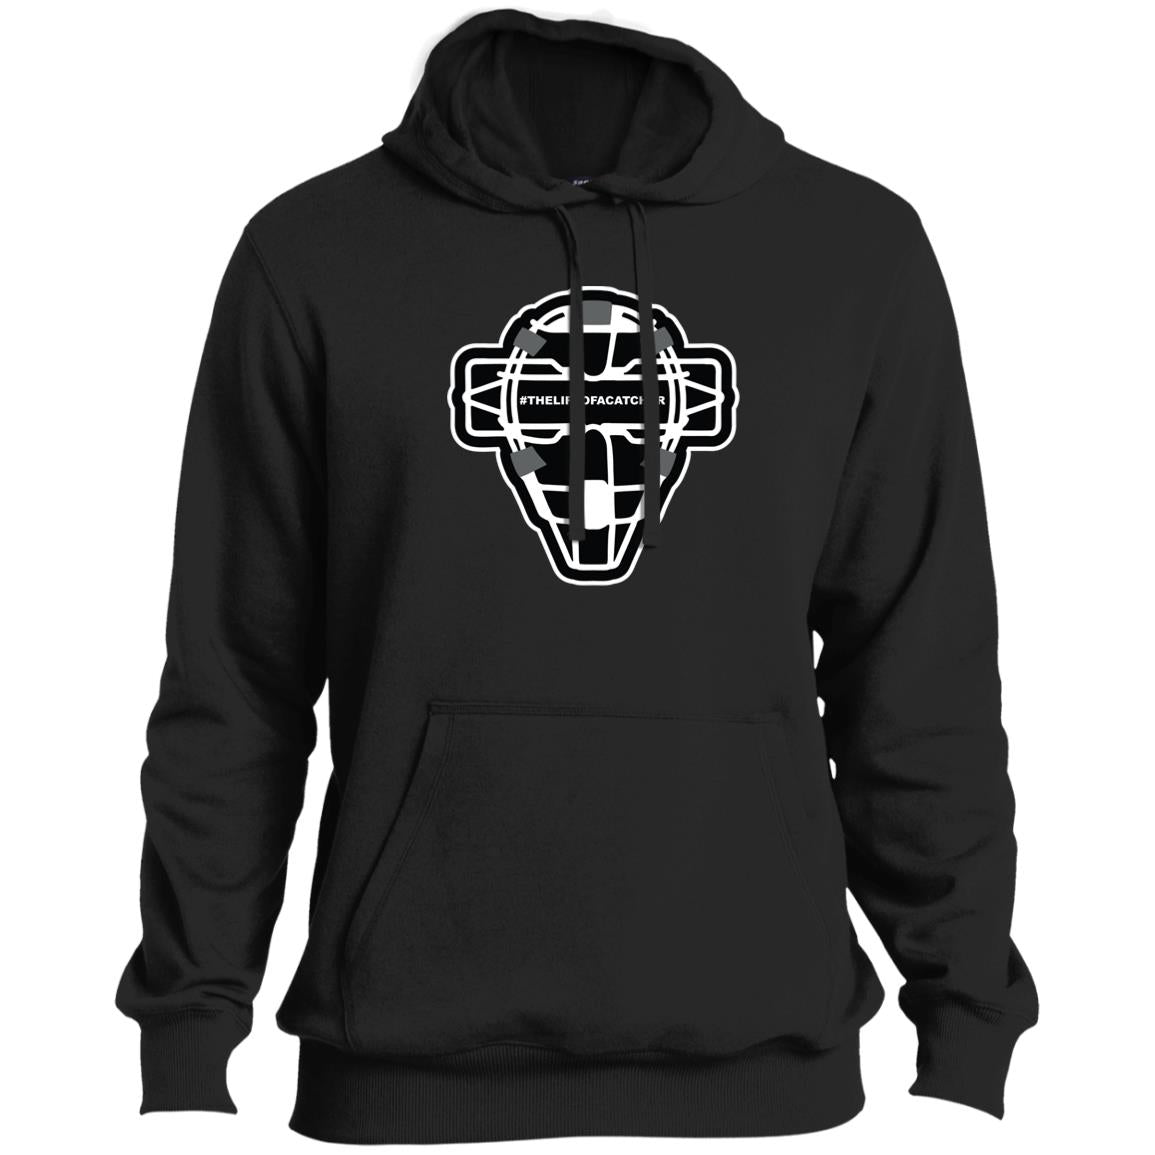 The-Catching-Guy-long-sleeve-sweater-black-Face-Mask